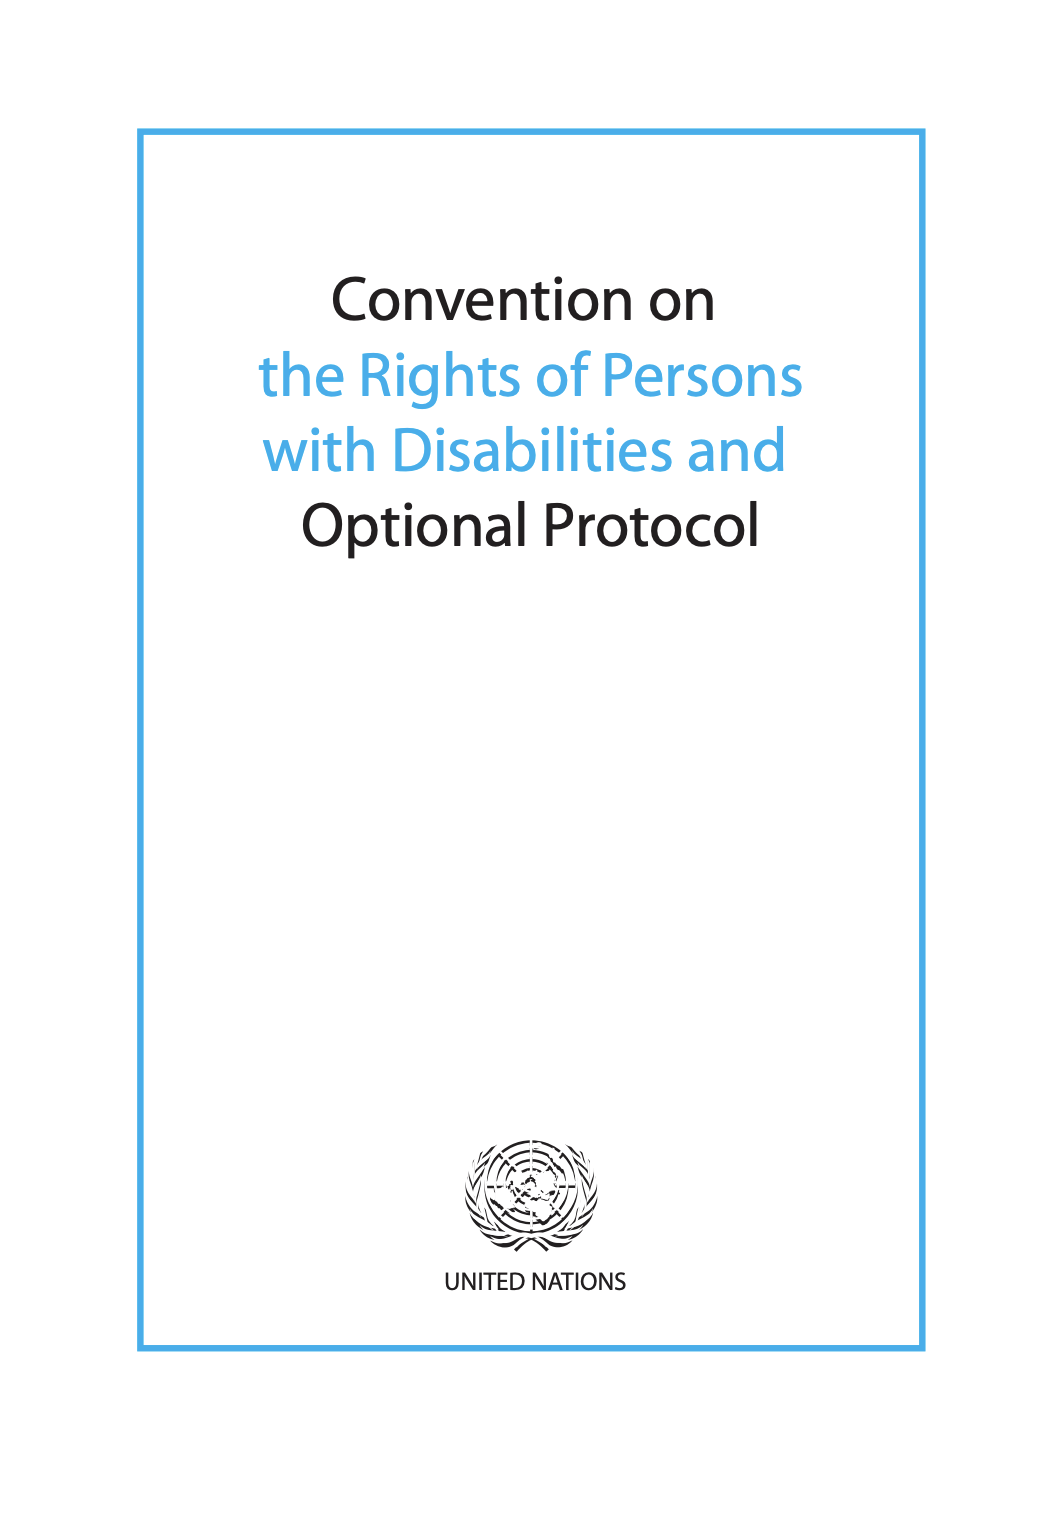 UNCRPD cover page